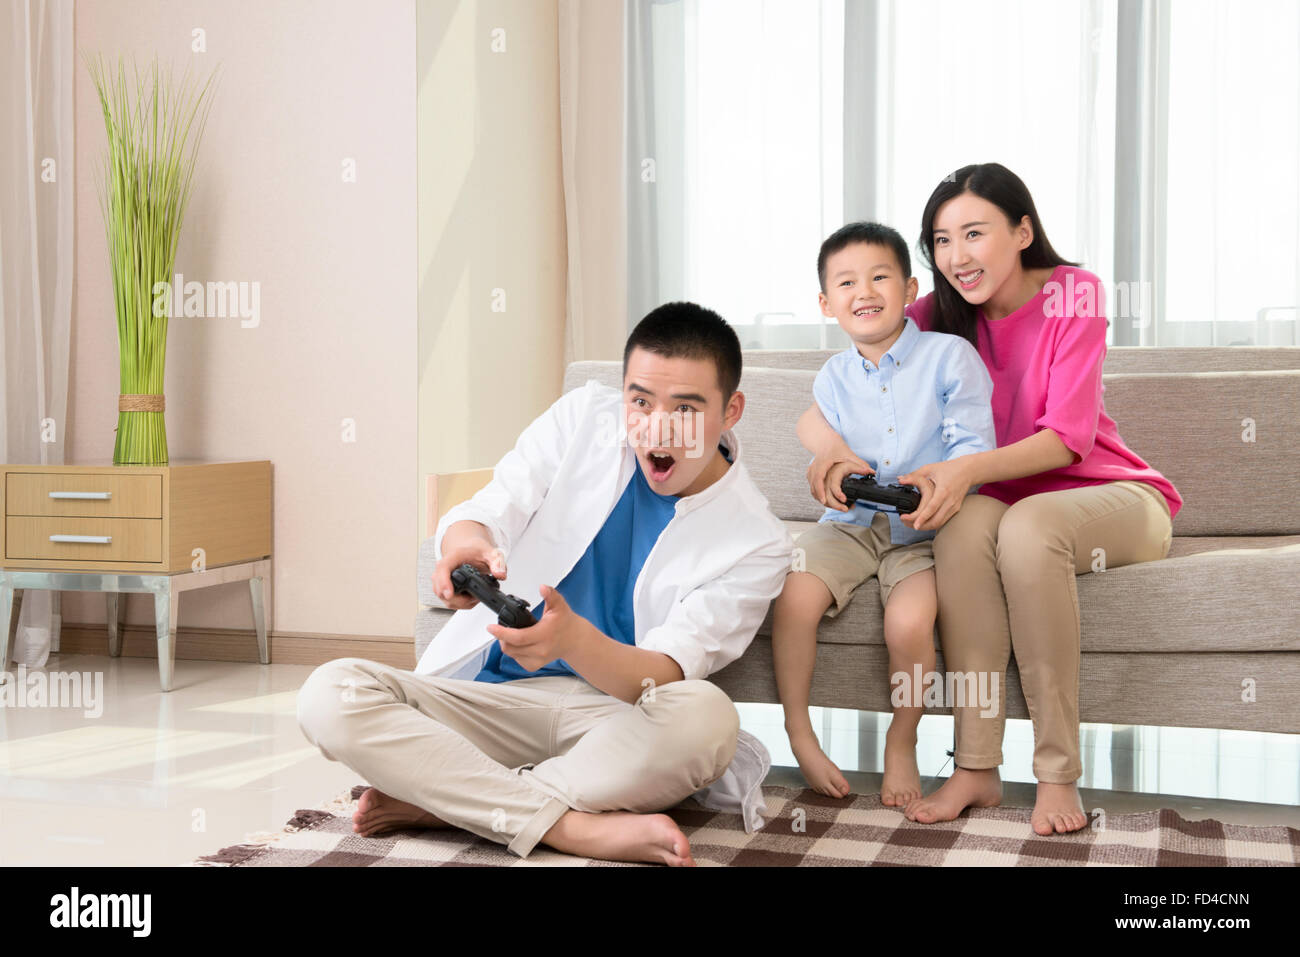 Young family playing video game Stock Photo